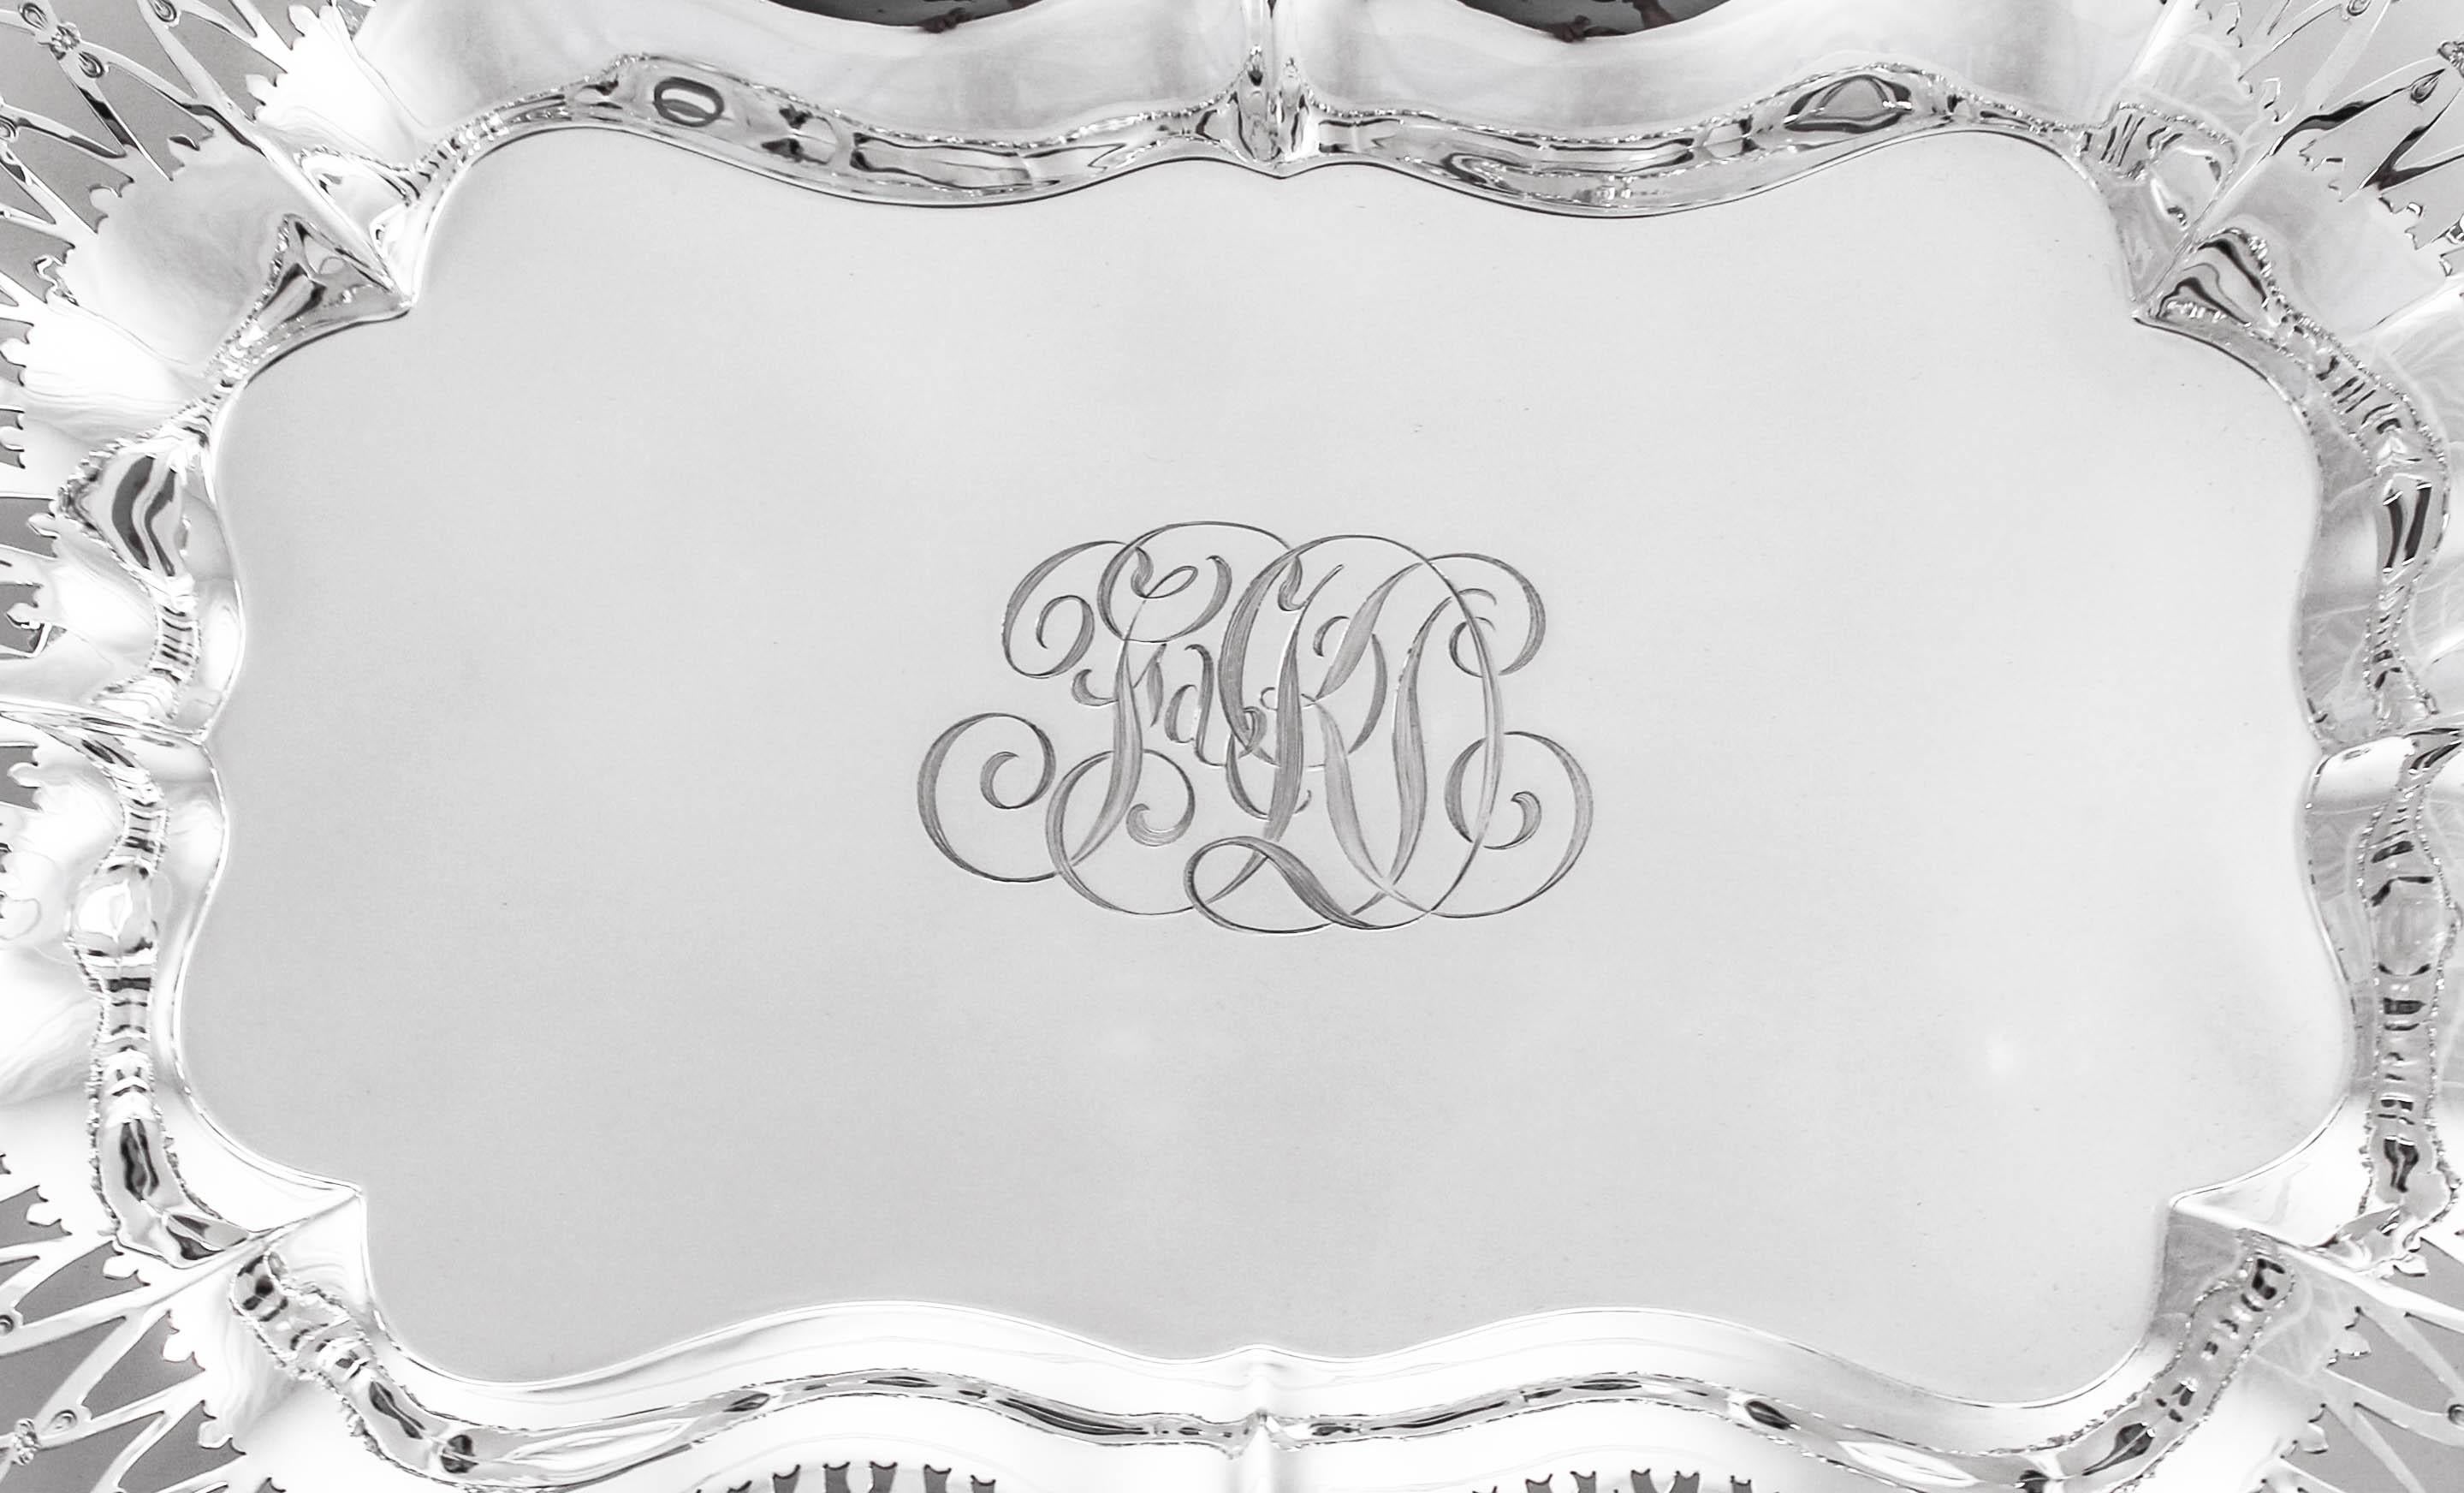 We proudly offer this sterling silver oblong tray by Black, Starr and Frost. It is reticulated and has an ornate rim that is also scalloped. In the center a hand engraved script monogram reminds you that although we’ve restored this piece to mint